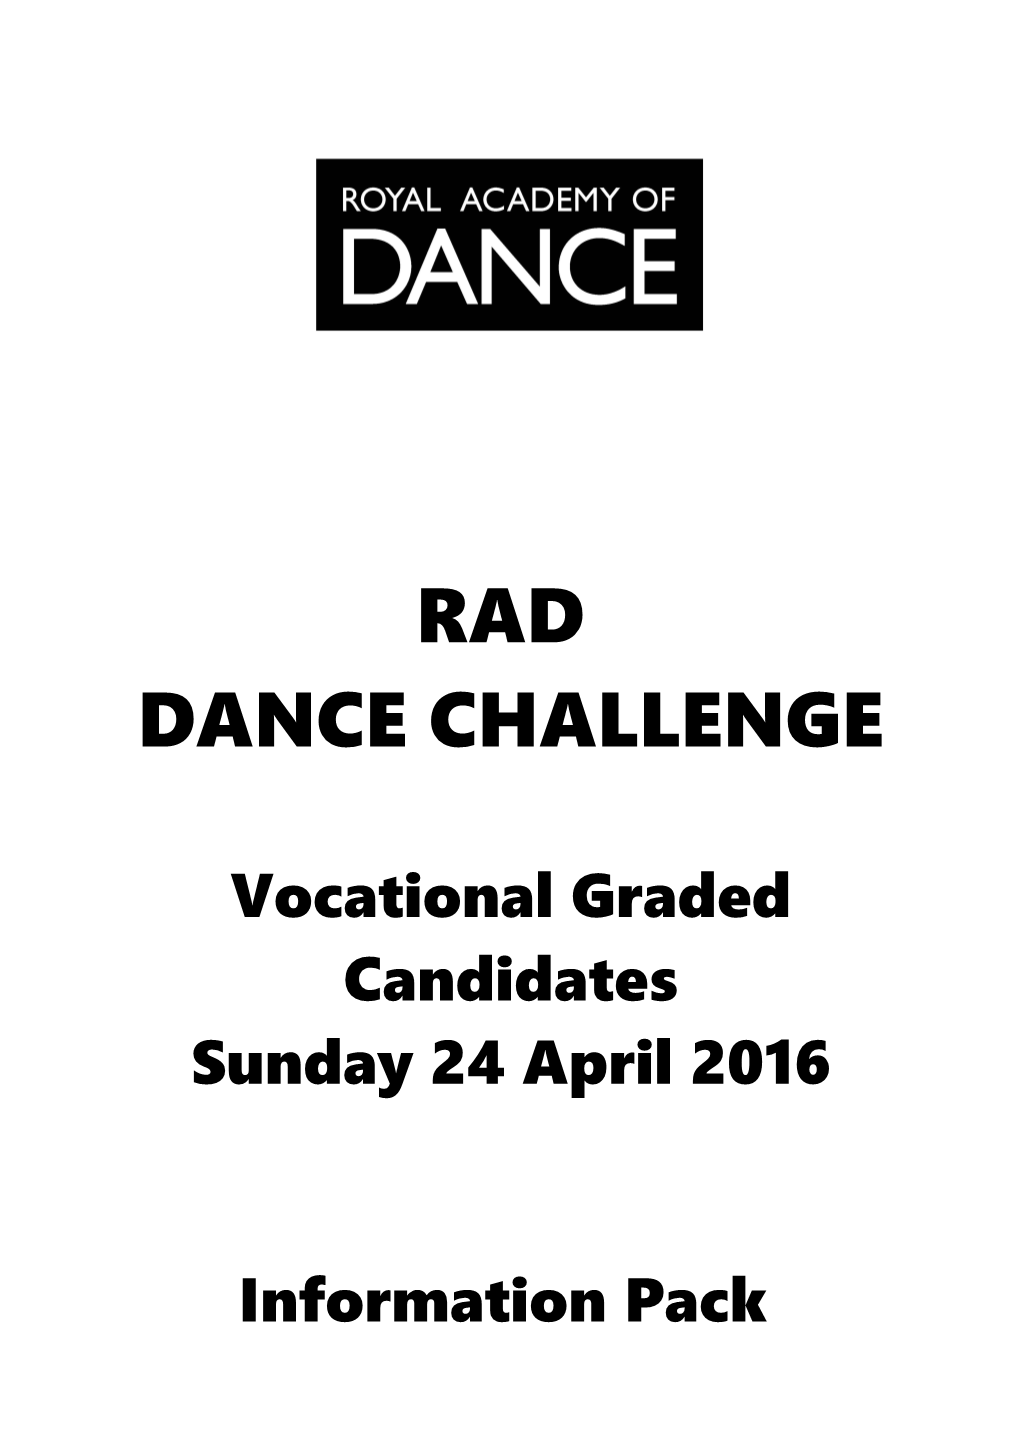 Vocational Graded Candidates